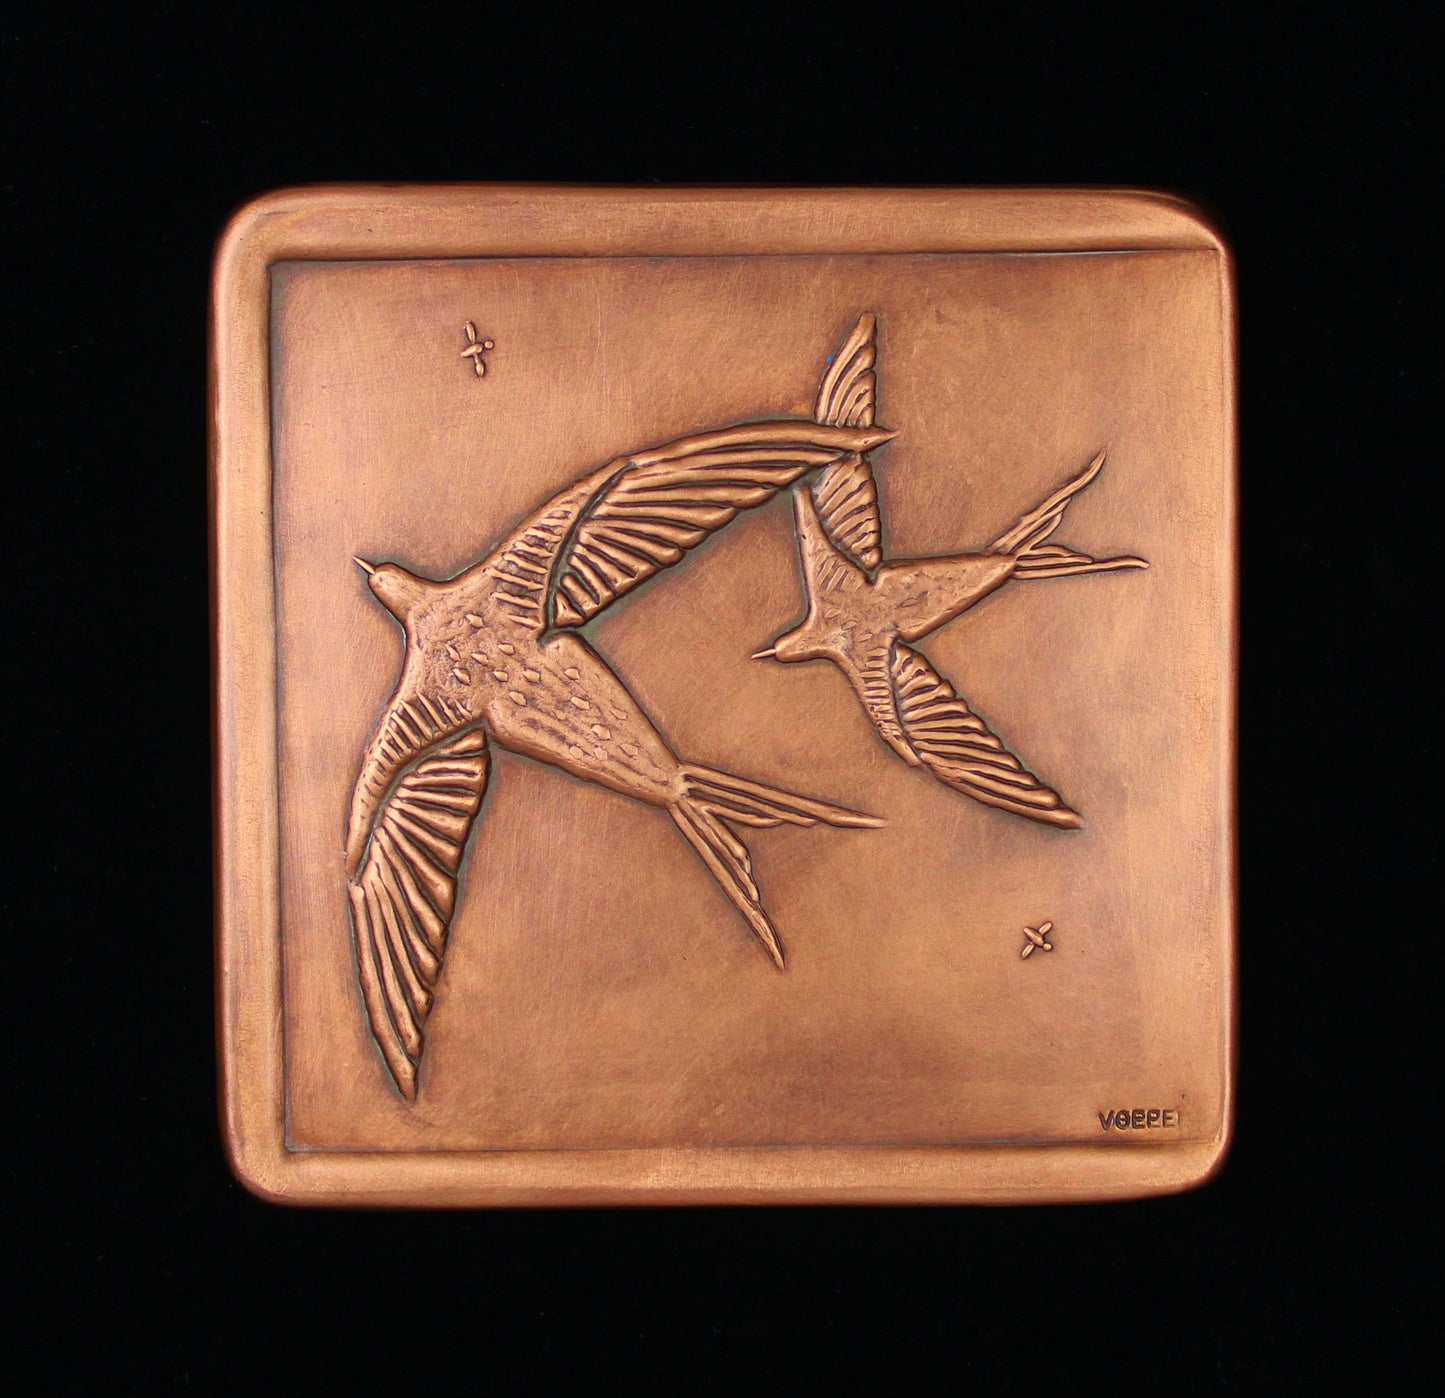 Swallows With Raised Border on Three Sides, 6"x 6" x 1/4", Facing Left